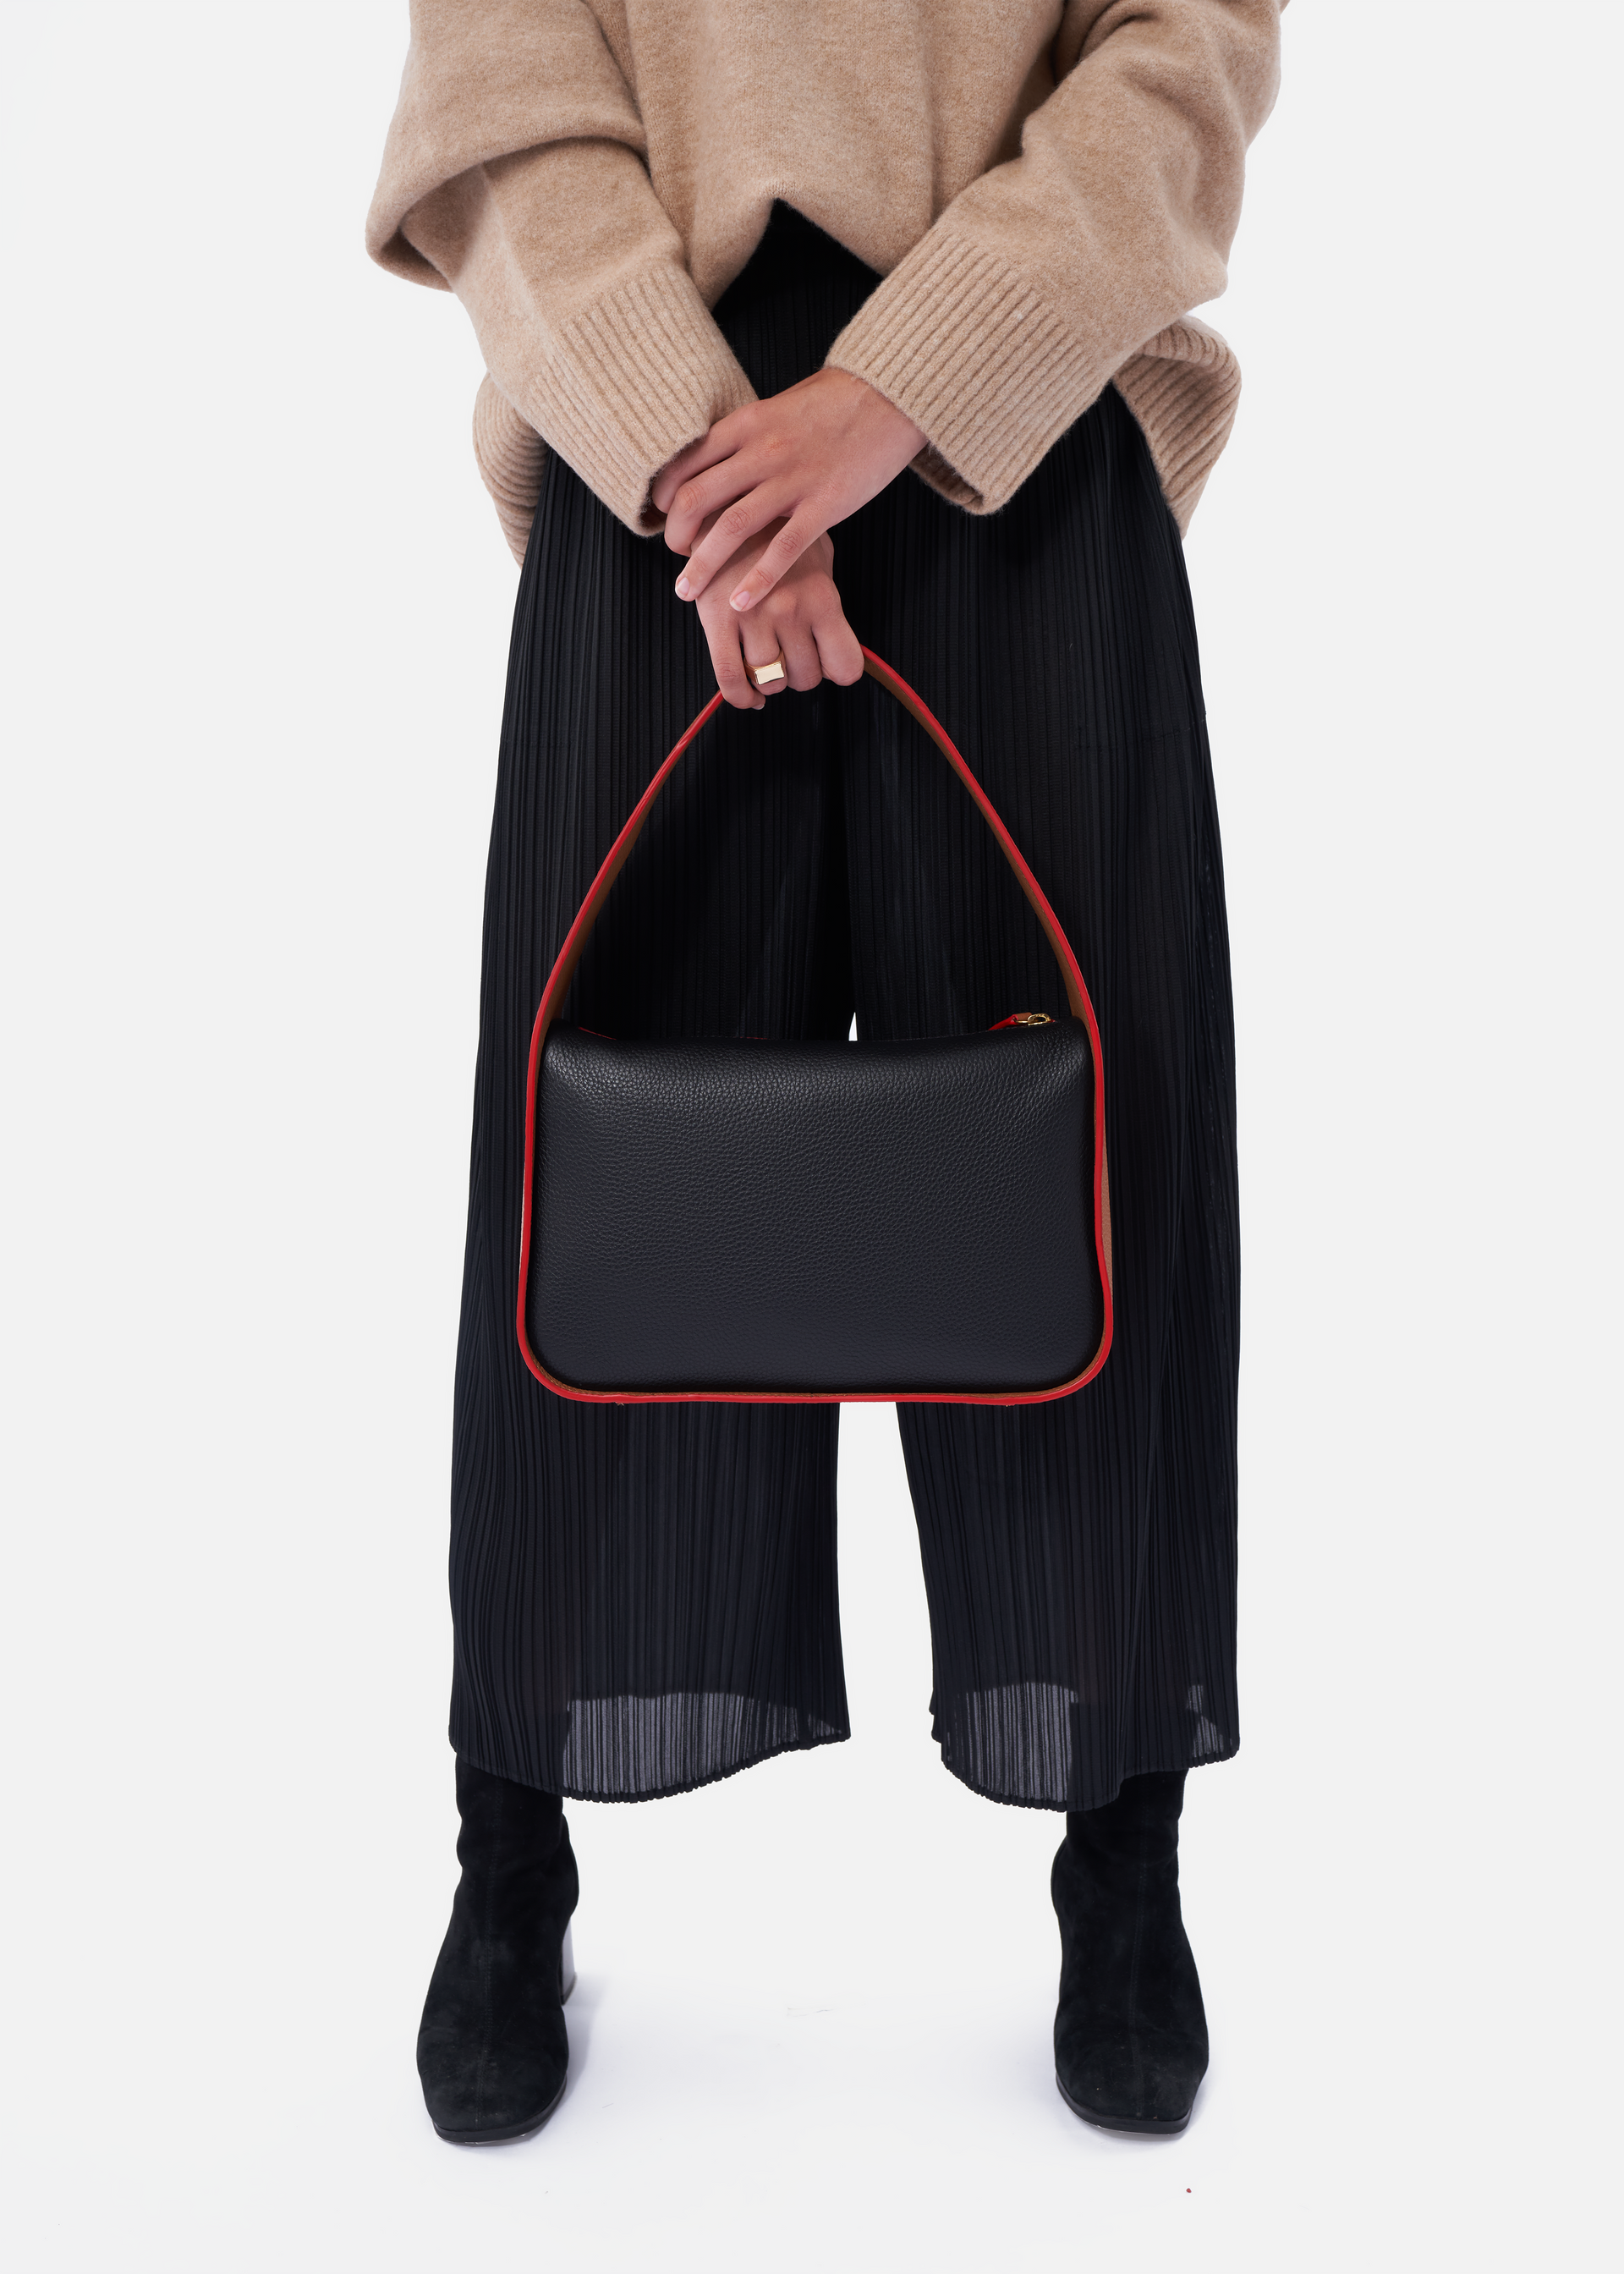 Grete pebble leather shoulder bag in black / caramel with red edge